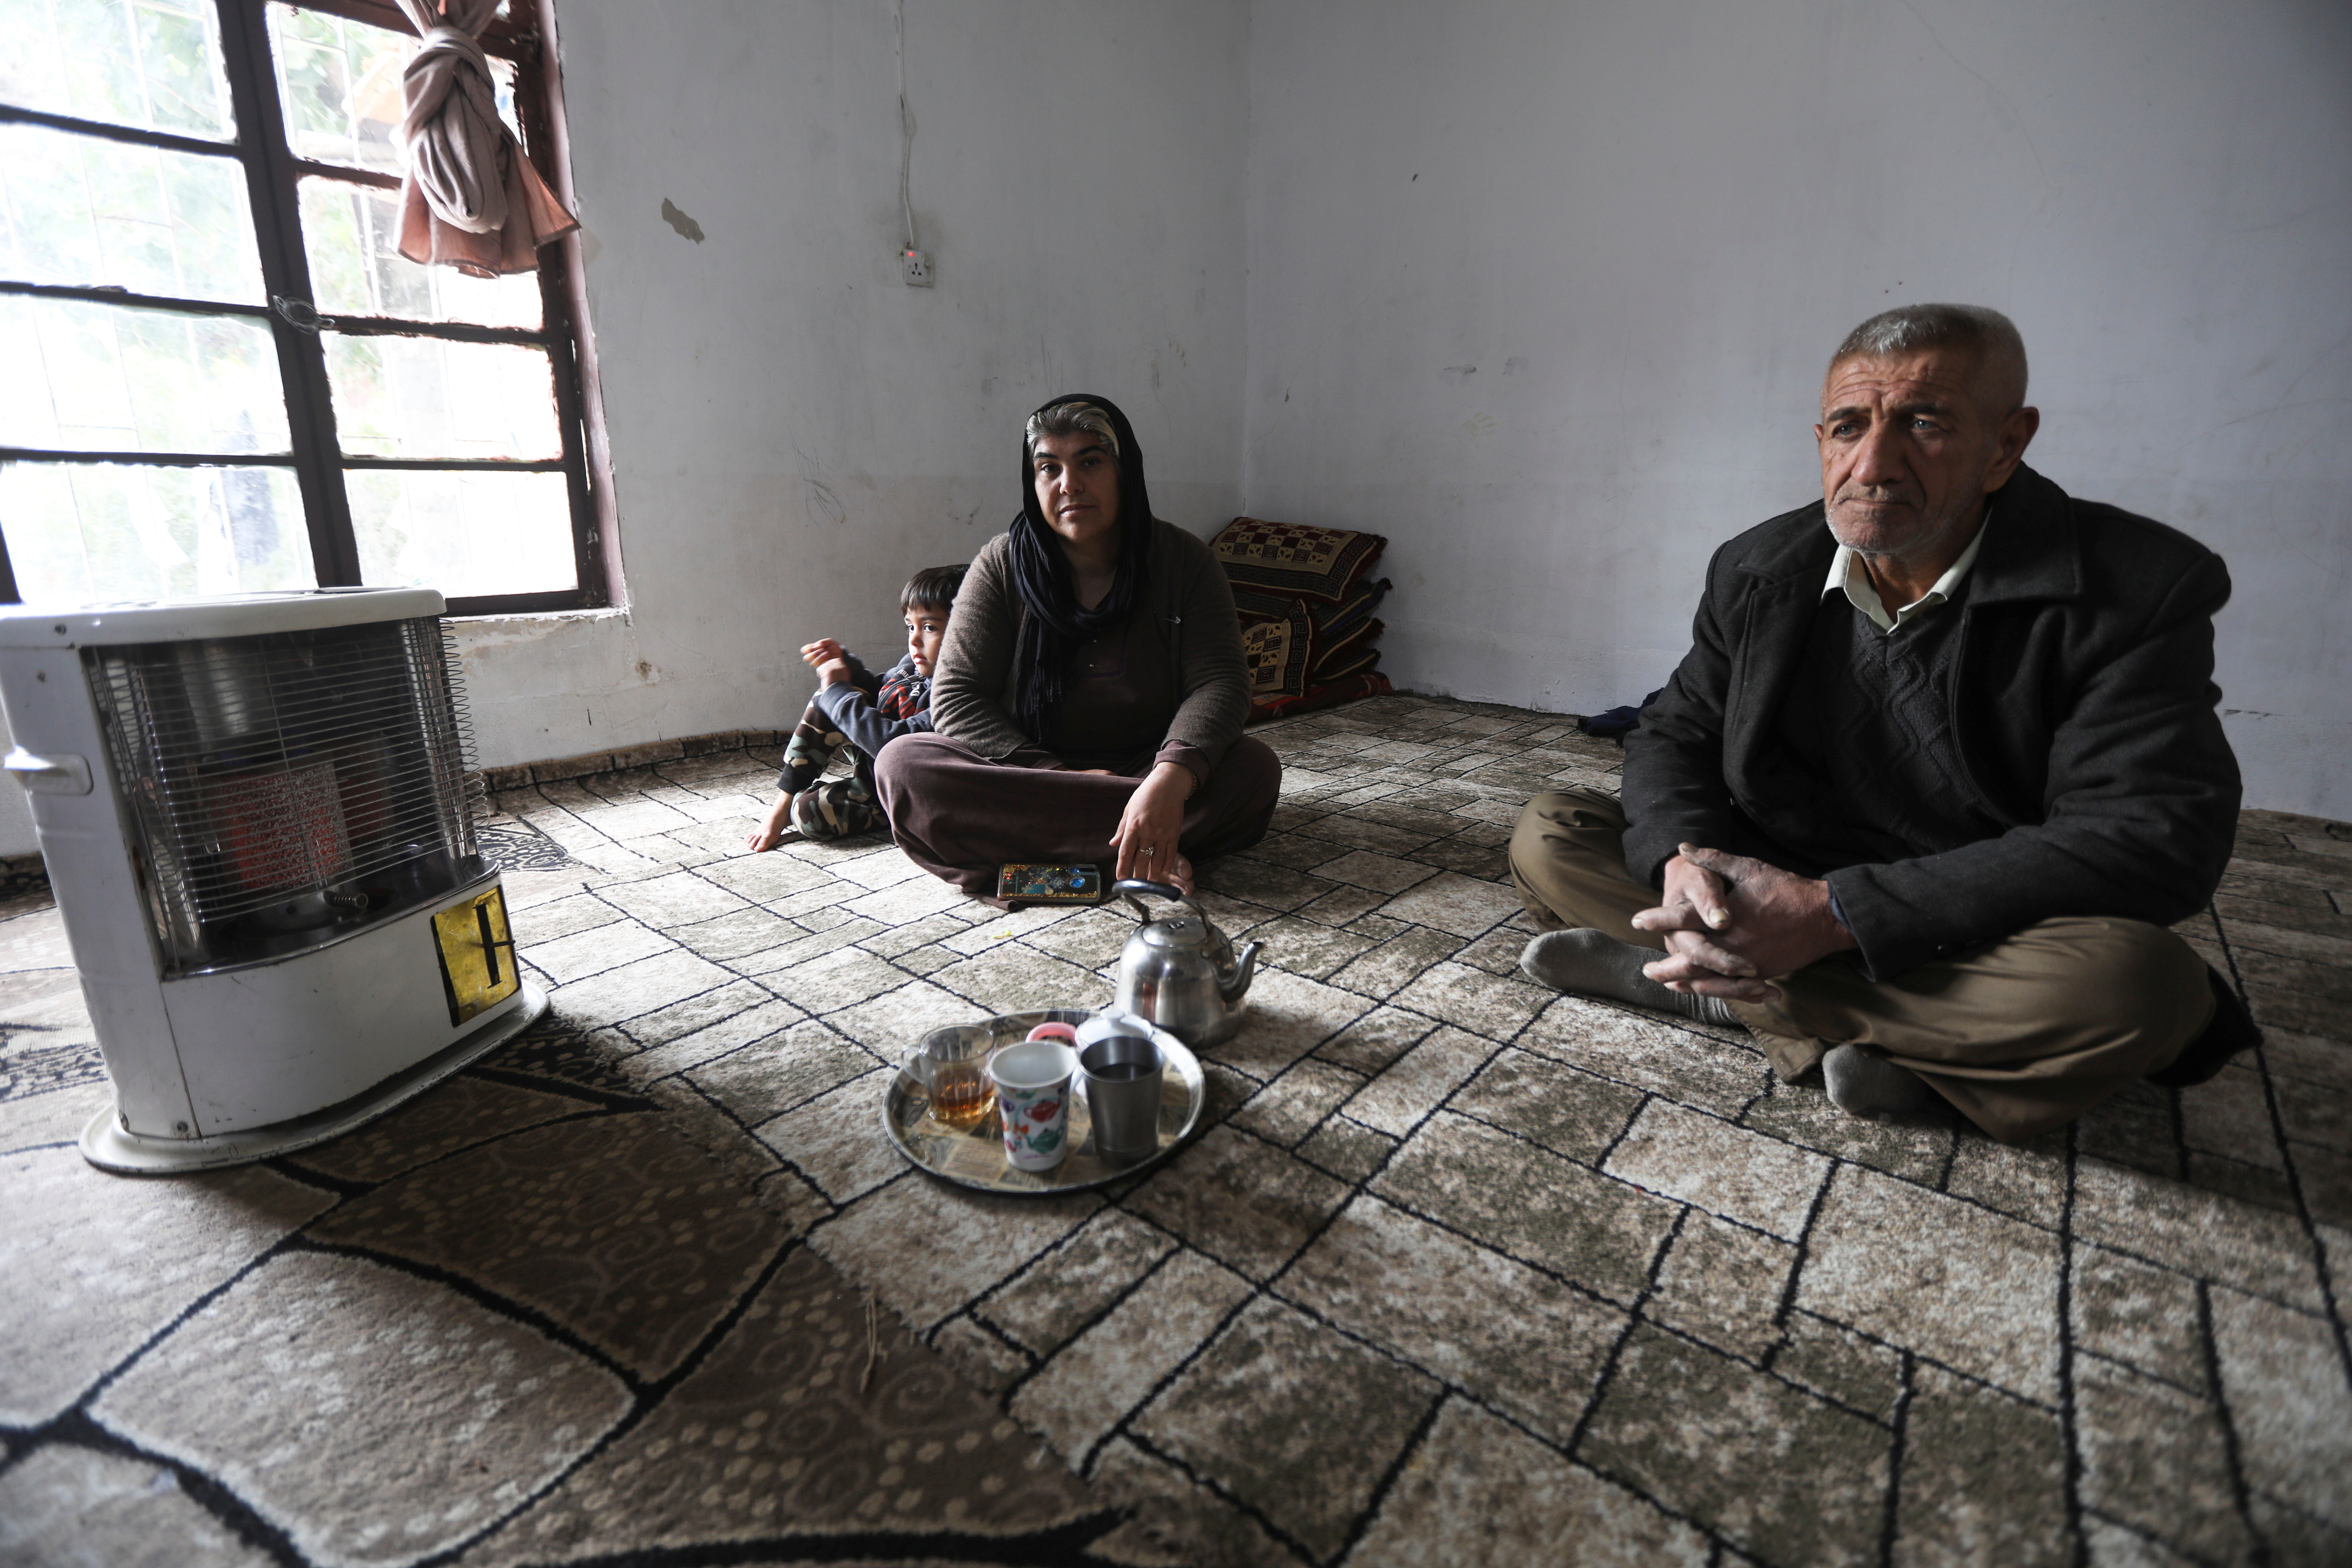 Zarin Soleiman, an Iranian Kurdish woman, sits with her brother after her son went to Minsk, in Qaladize